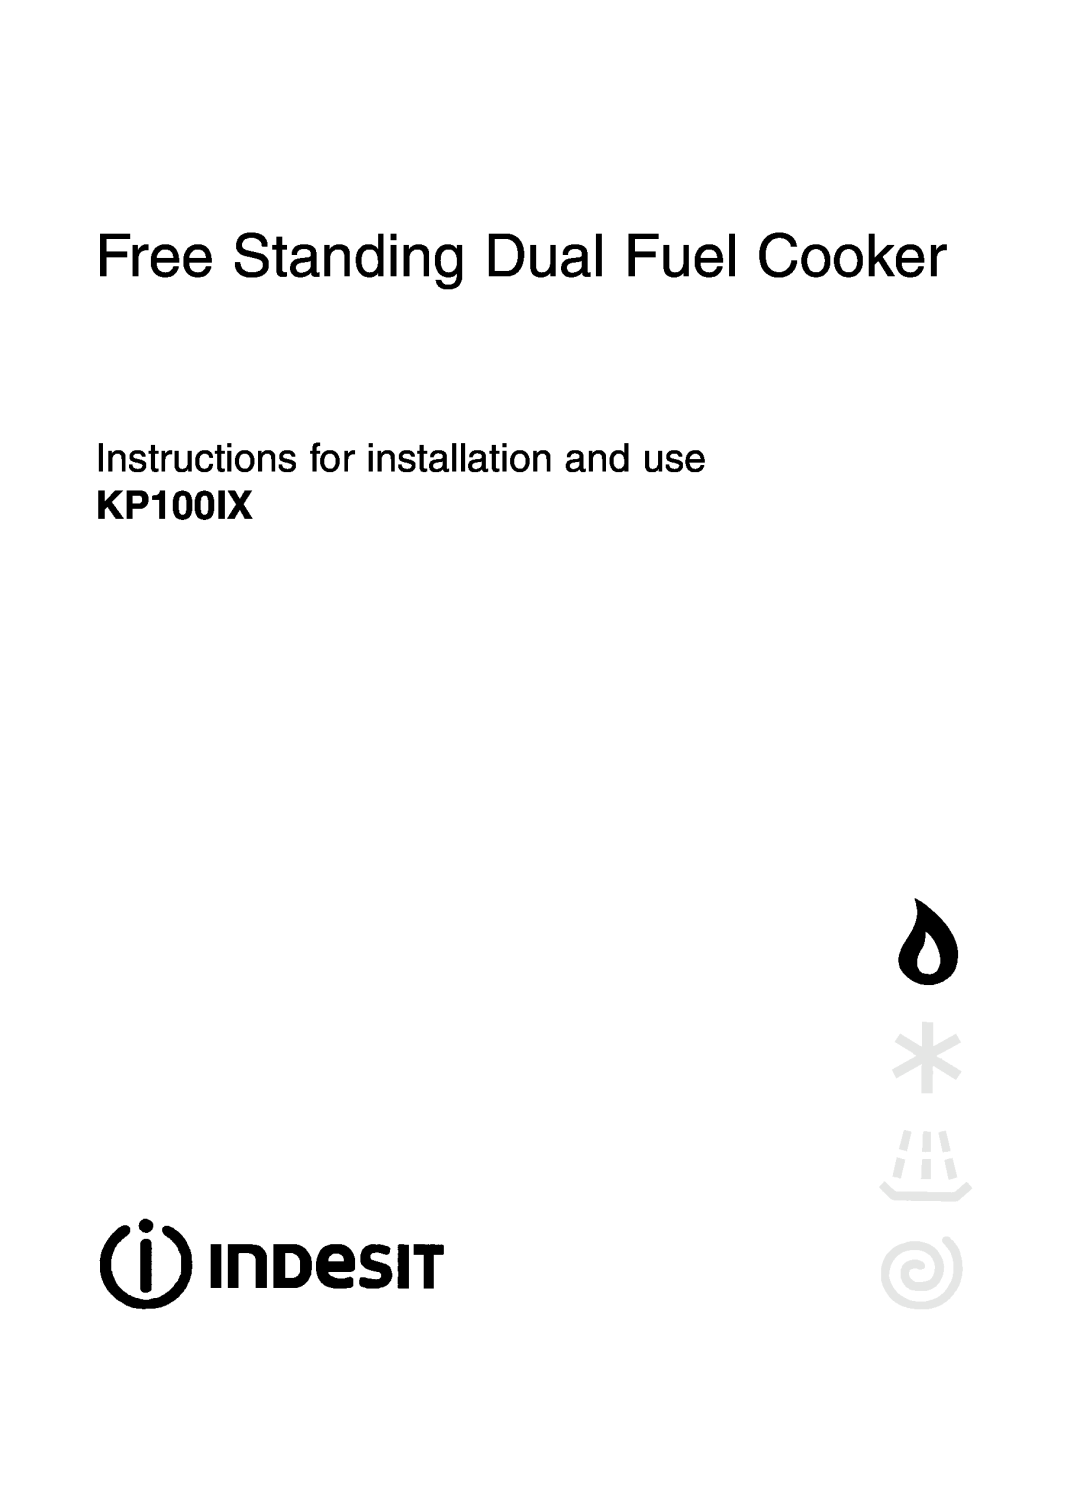 Indesit KP100IX manual Free Standing Dual Fuel Cooker, Instructions for installation and use 